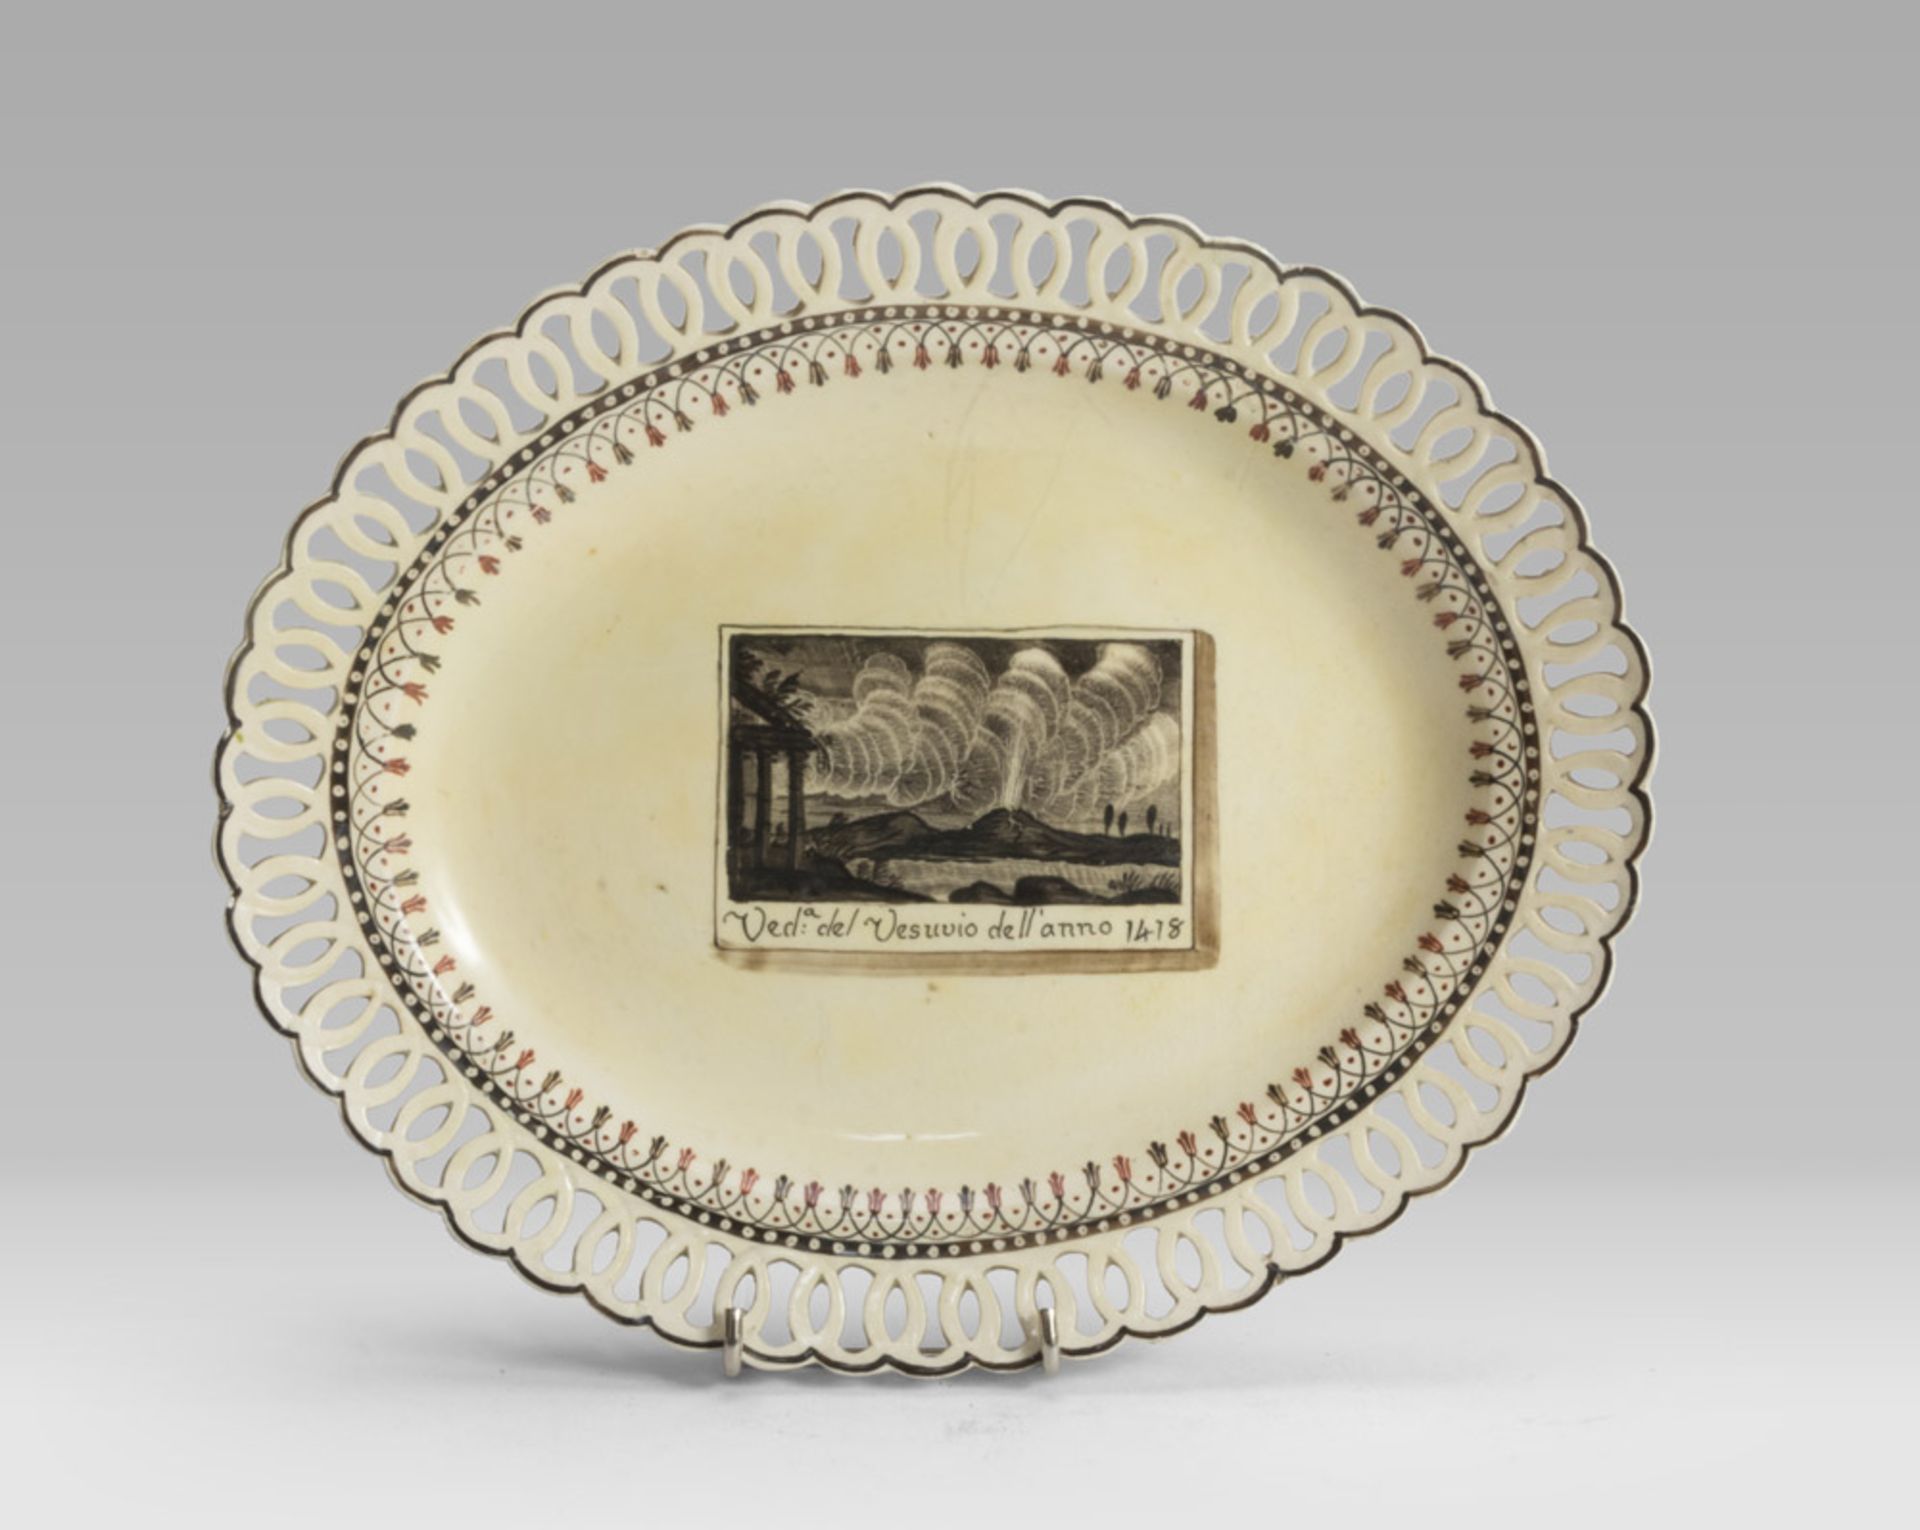 EARTHENWARE DISH, NAPLES SECOLO to enamel cream, with ground centered with view of the Vesuvius of